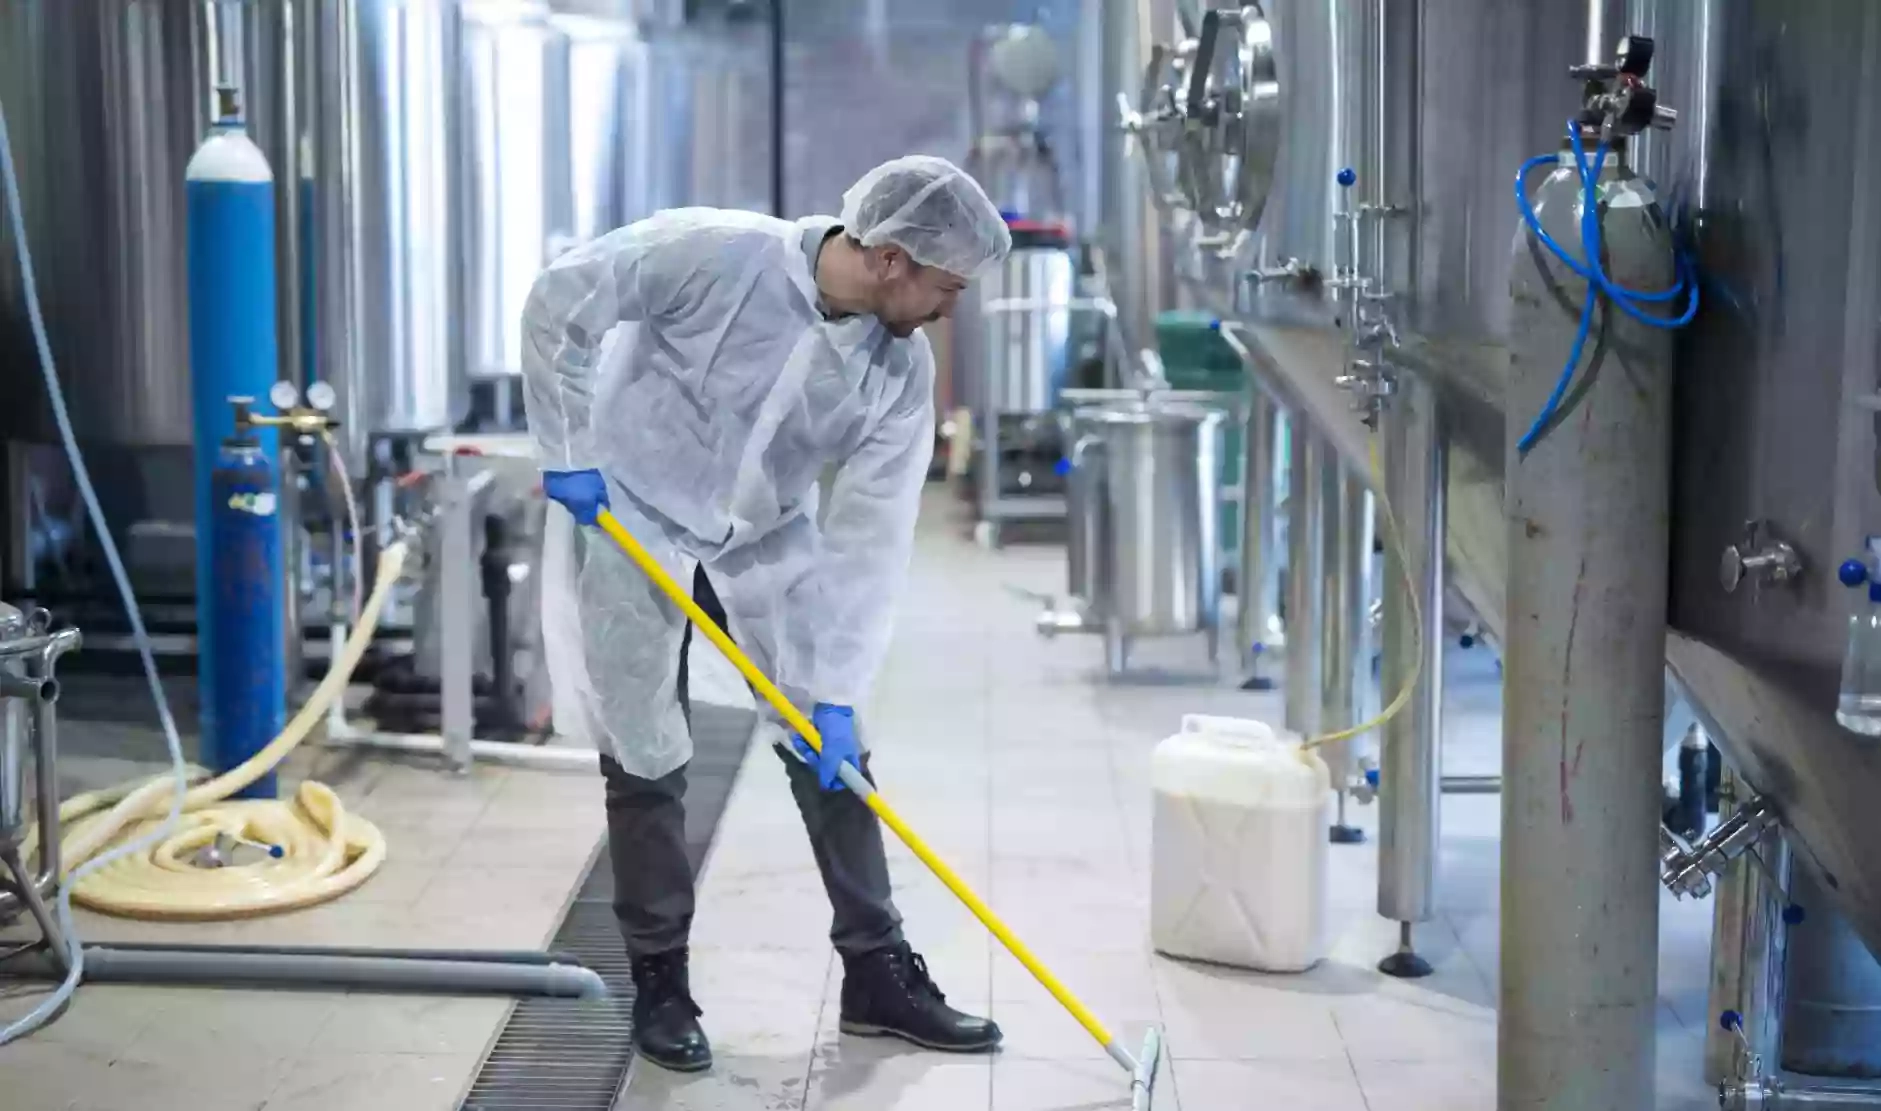 ACSUK CO LTD - Industrial and Commercial Cleaning Company